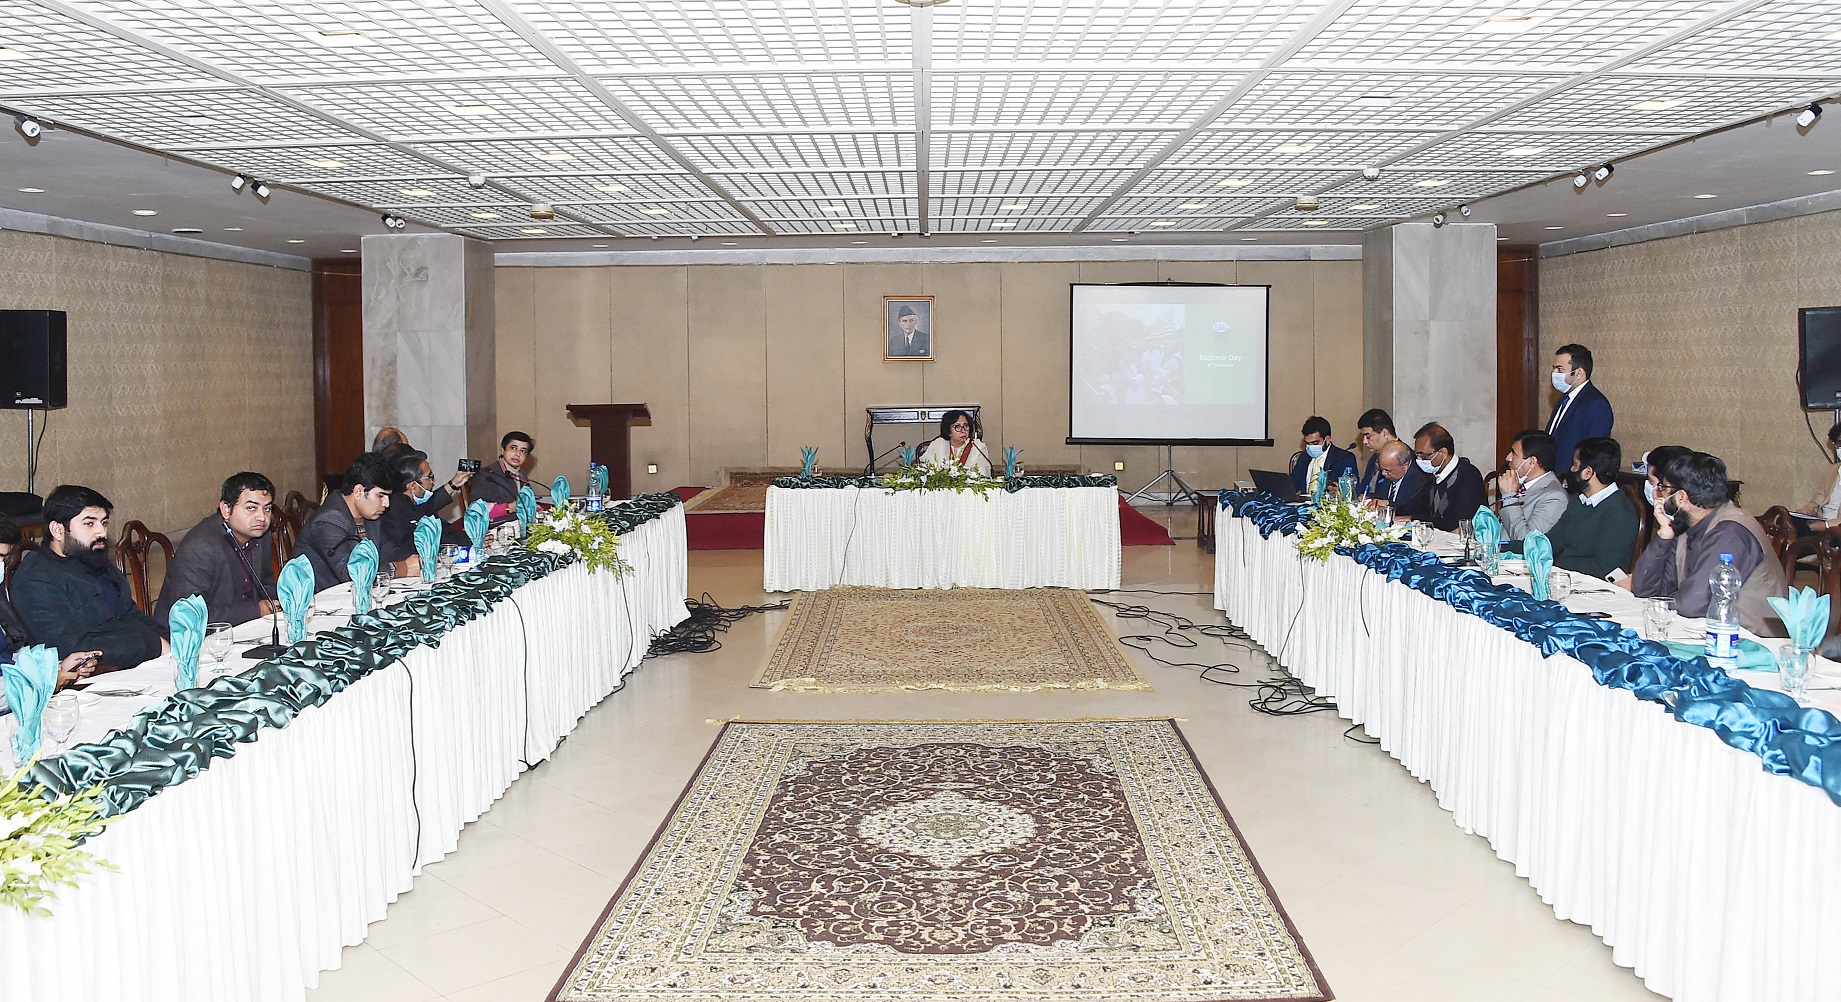 Media Consultation on Gender and Climate Change Parliamentary Initiatives